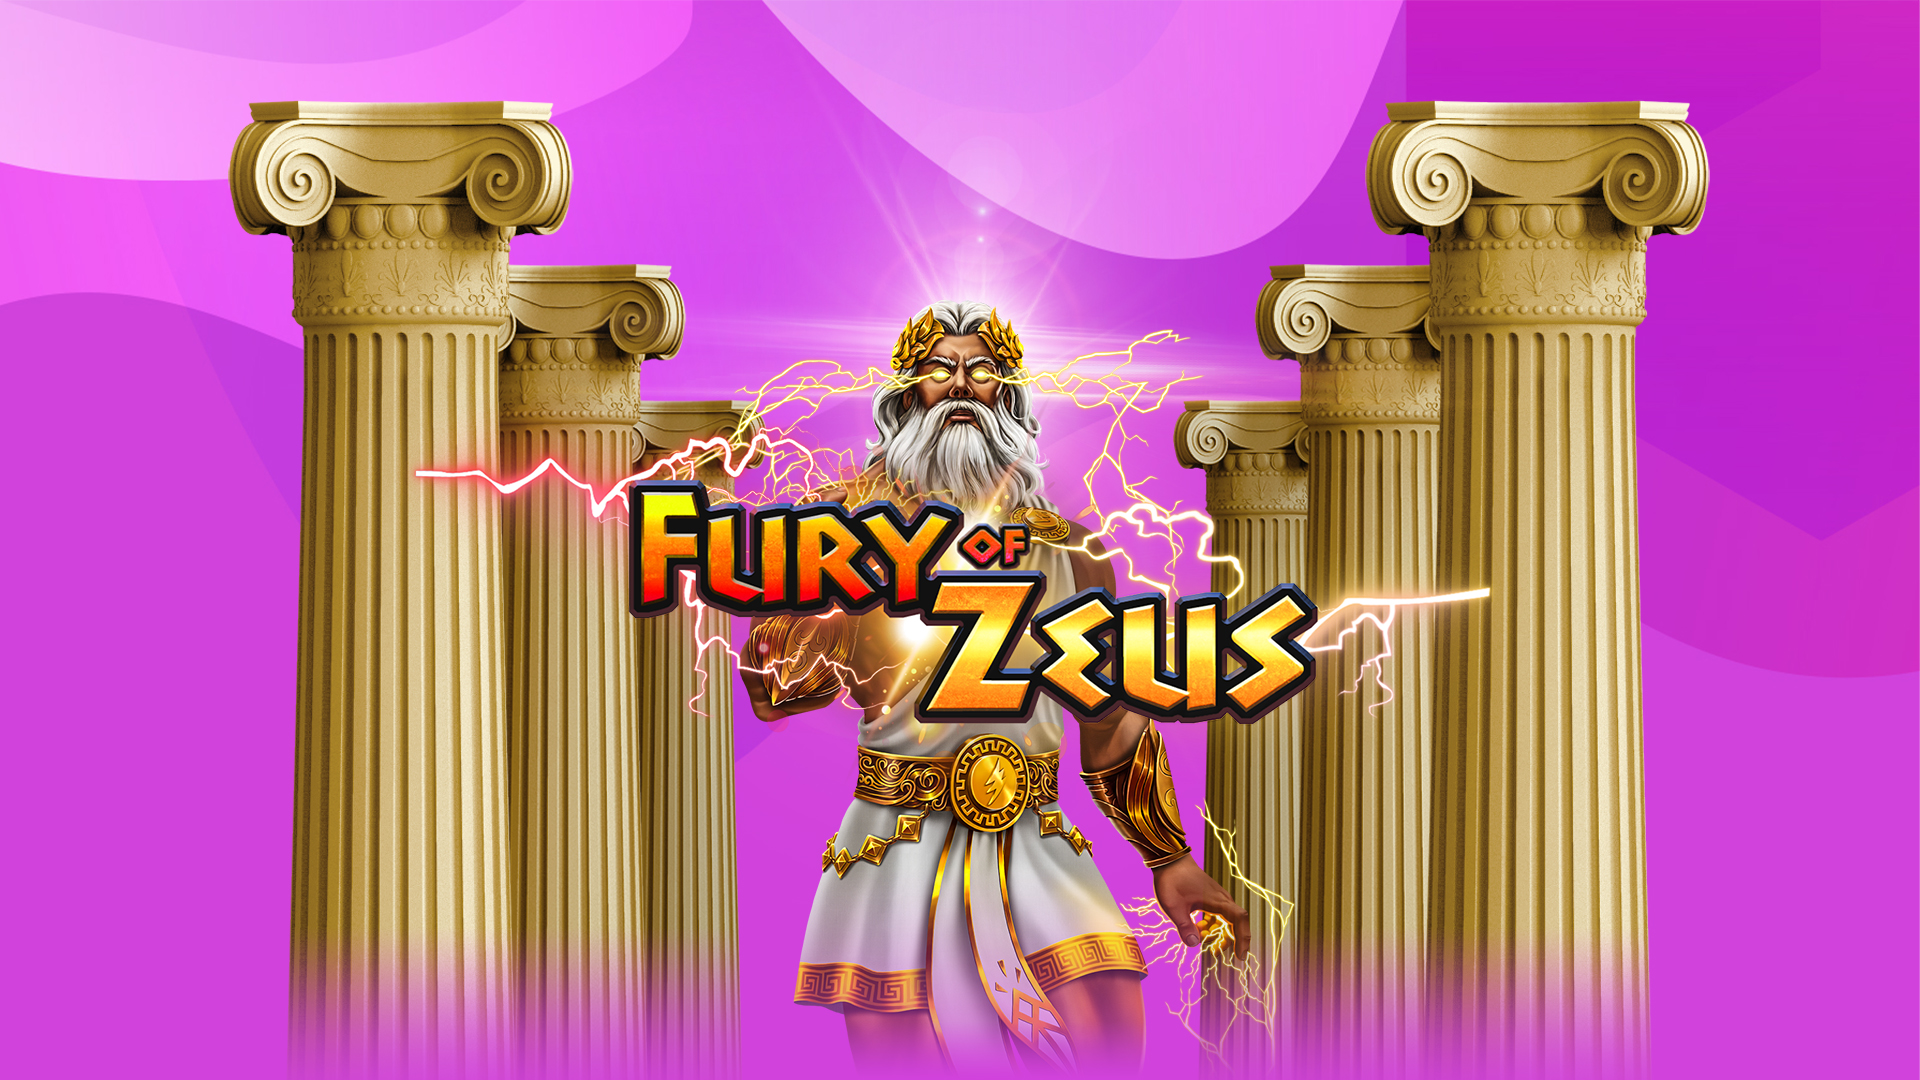 A 3D depiction of the god Zeus from the SlotsLV slots game, Fury of Zeus. He stands behind the game logo, in between ancient marble pillars.